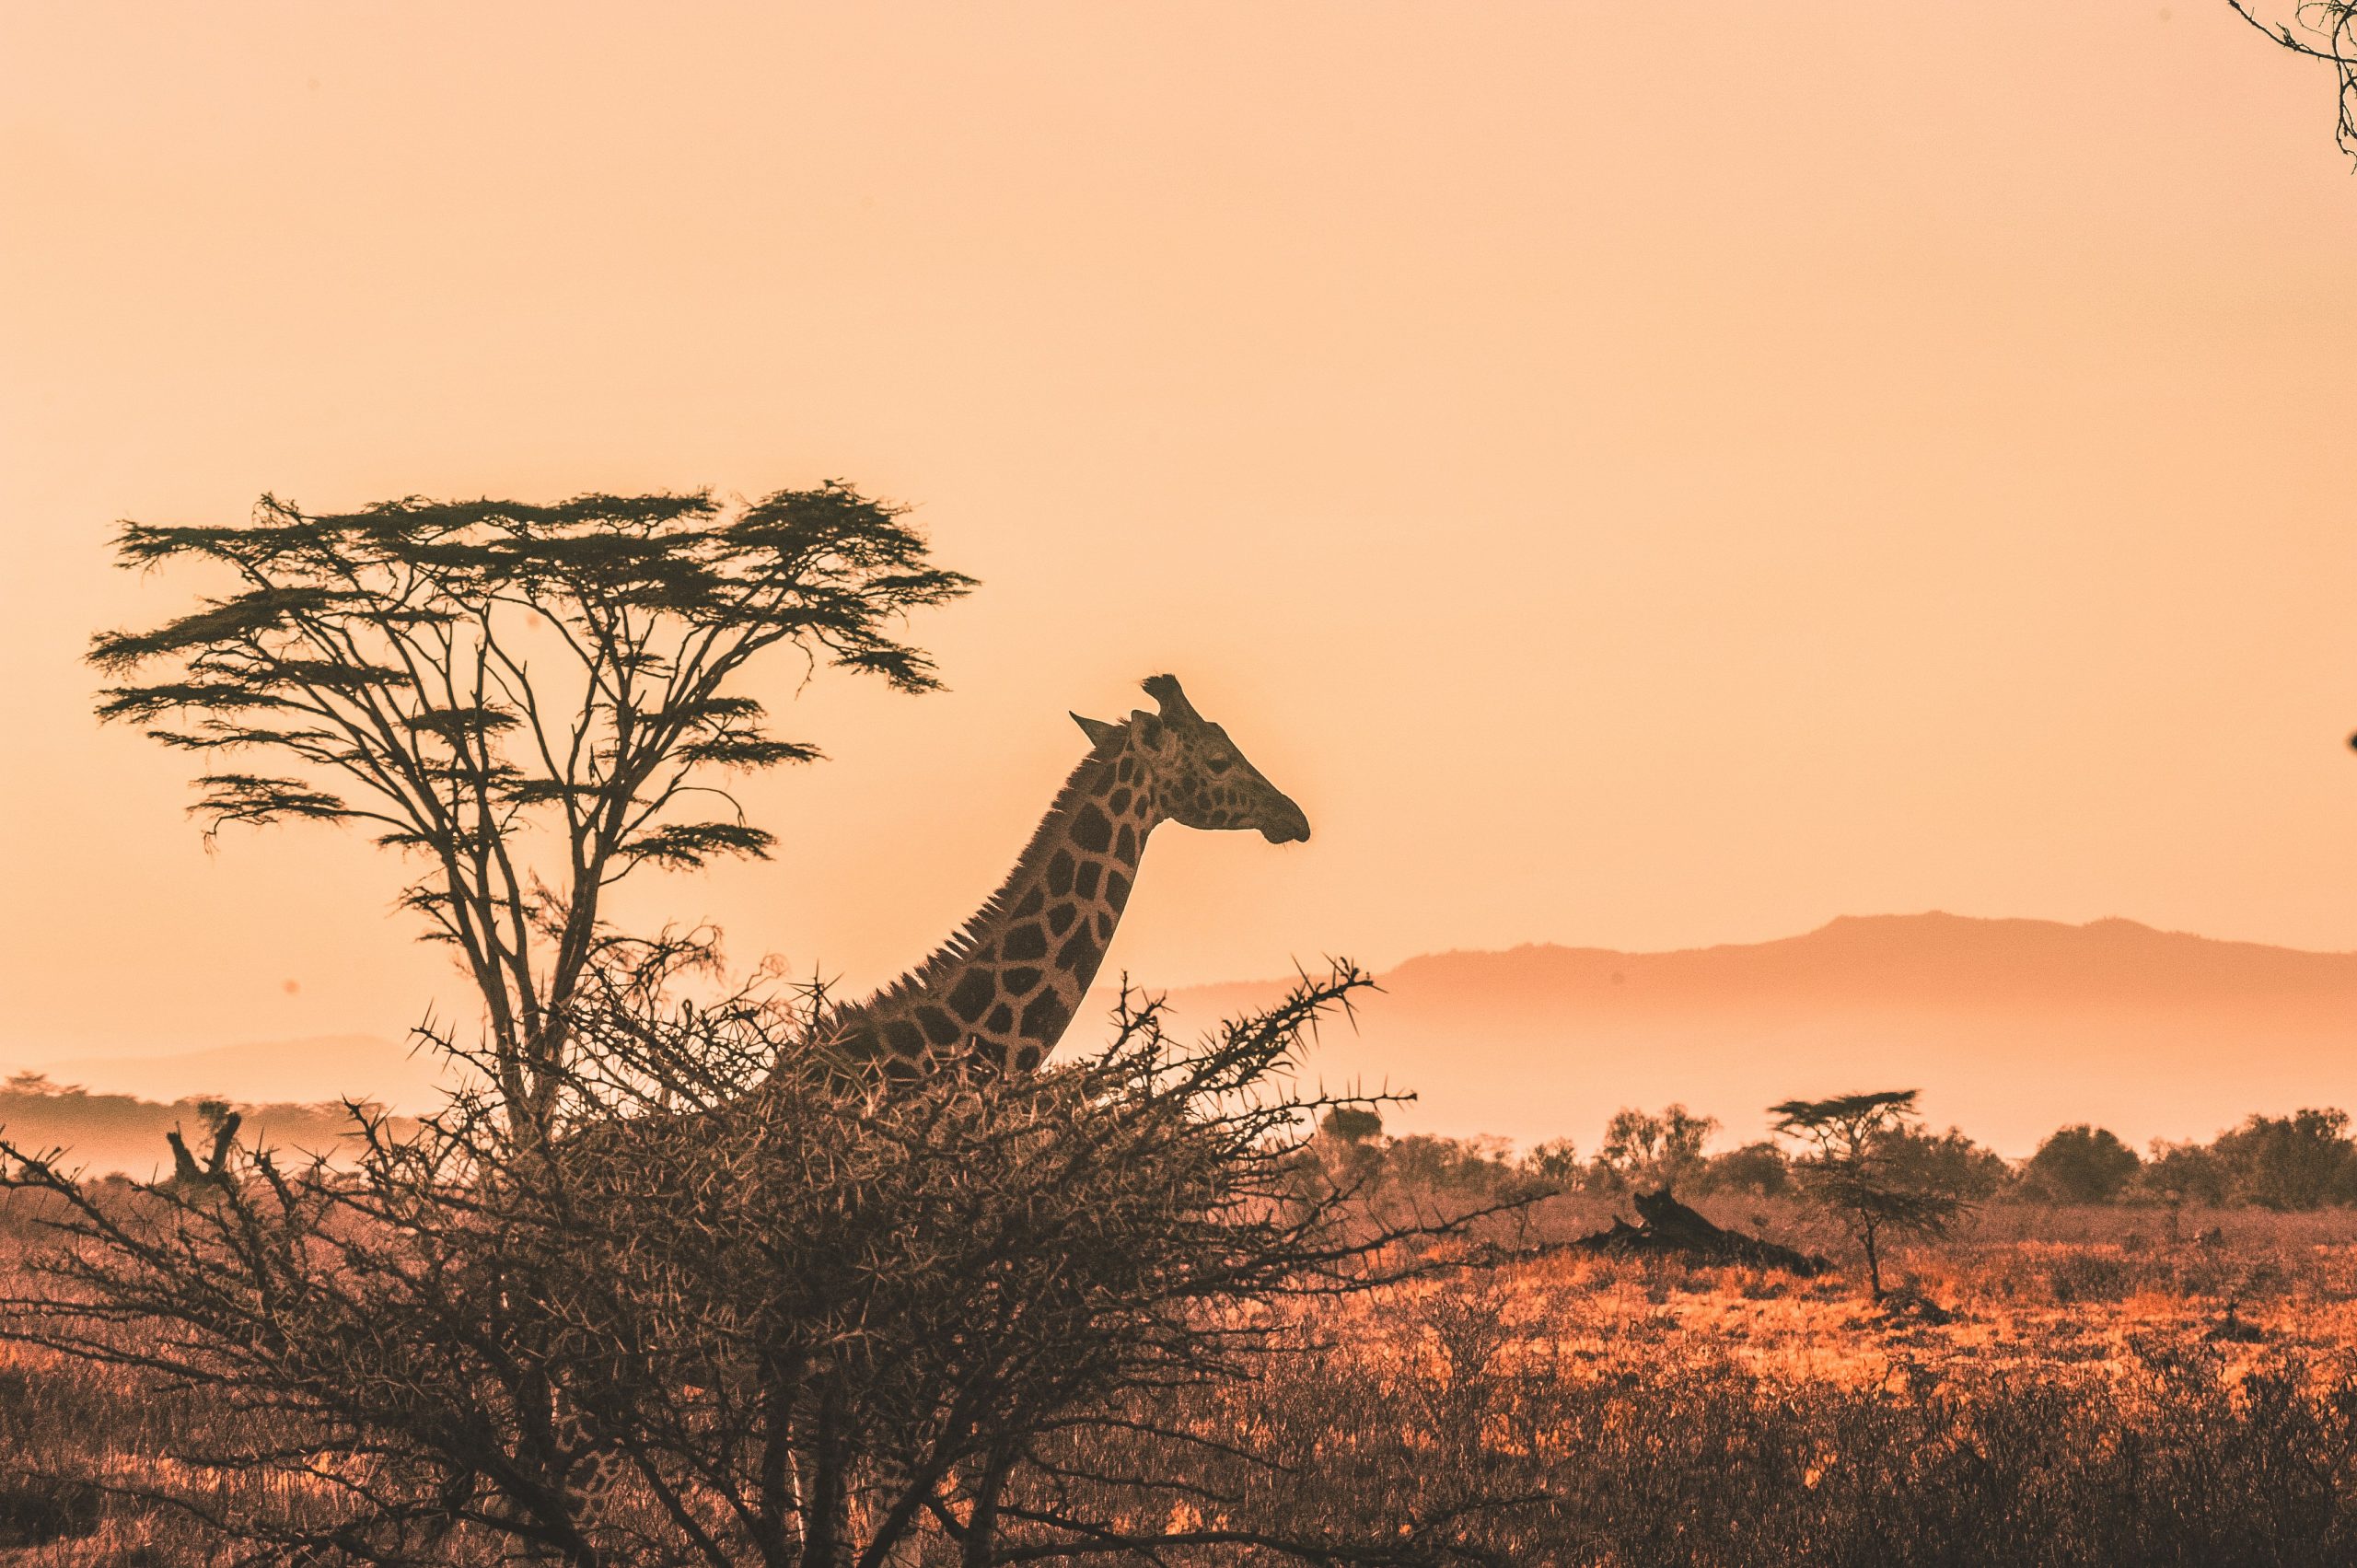 experience the wonders of africa with a thrilling safari adventure. encounter majestic wildlife and breathtaking landscapes on a safari of a lifetime.